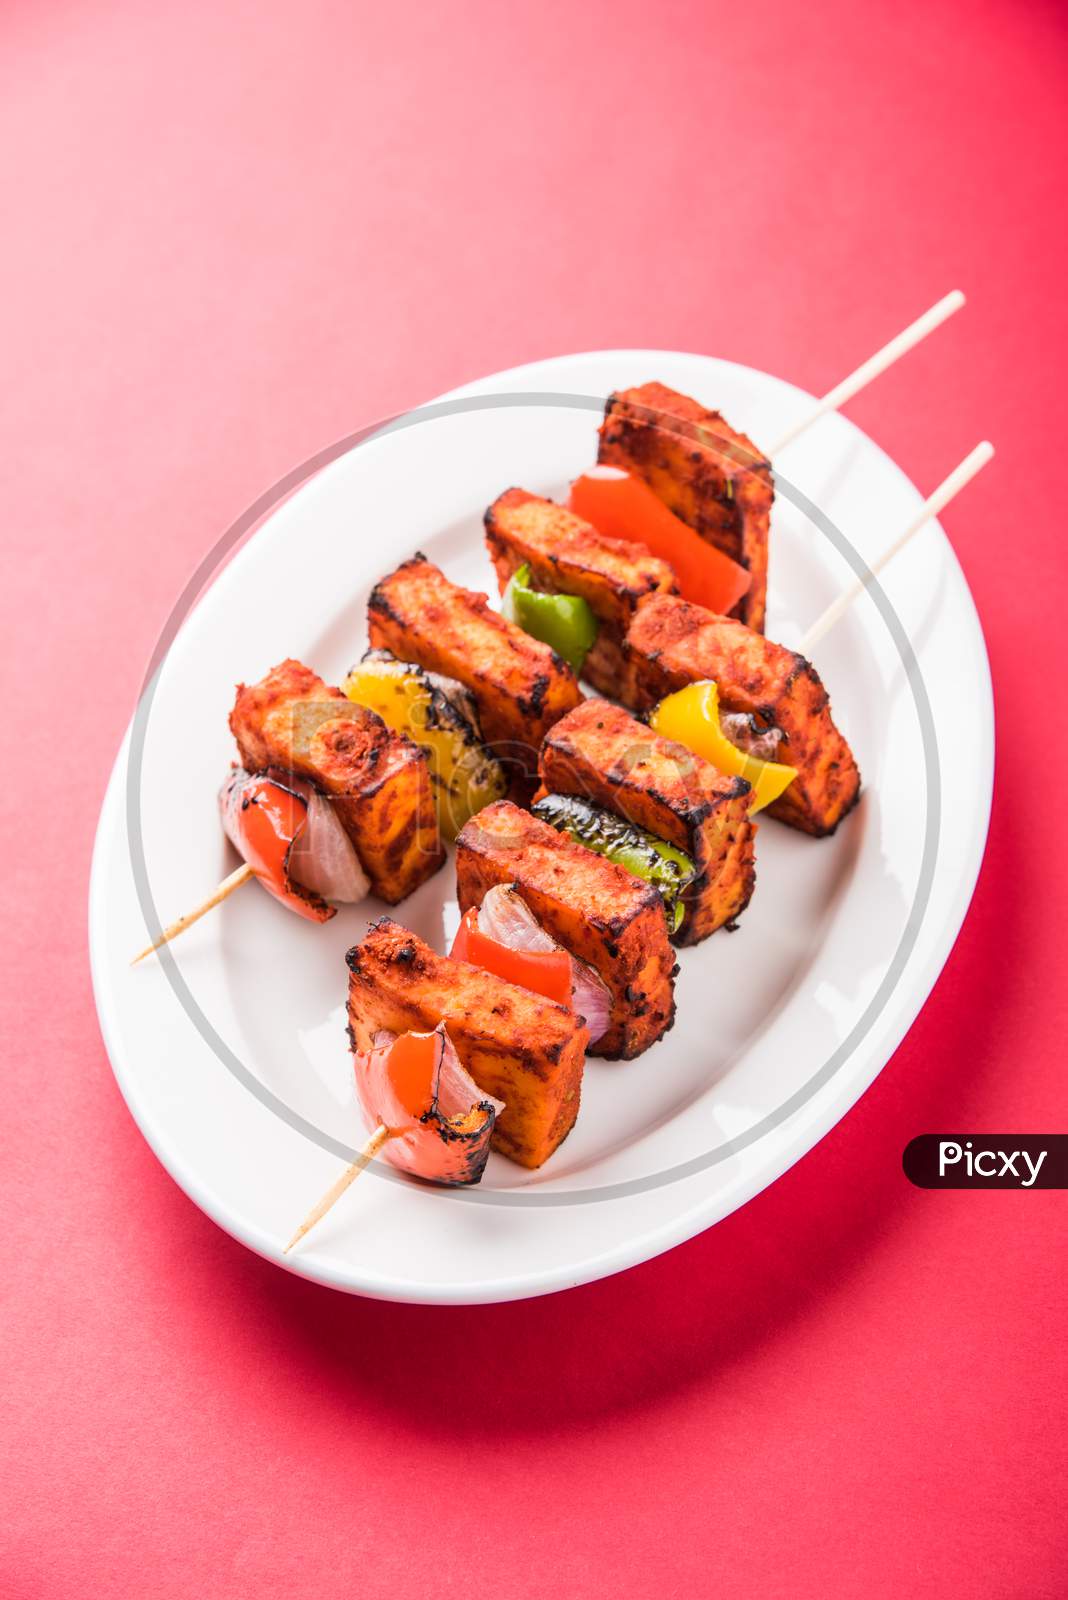 Chilli Paneer Tikka Kabab in red sauce made in Barbeque or Tandoor